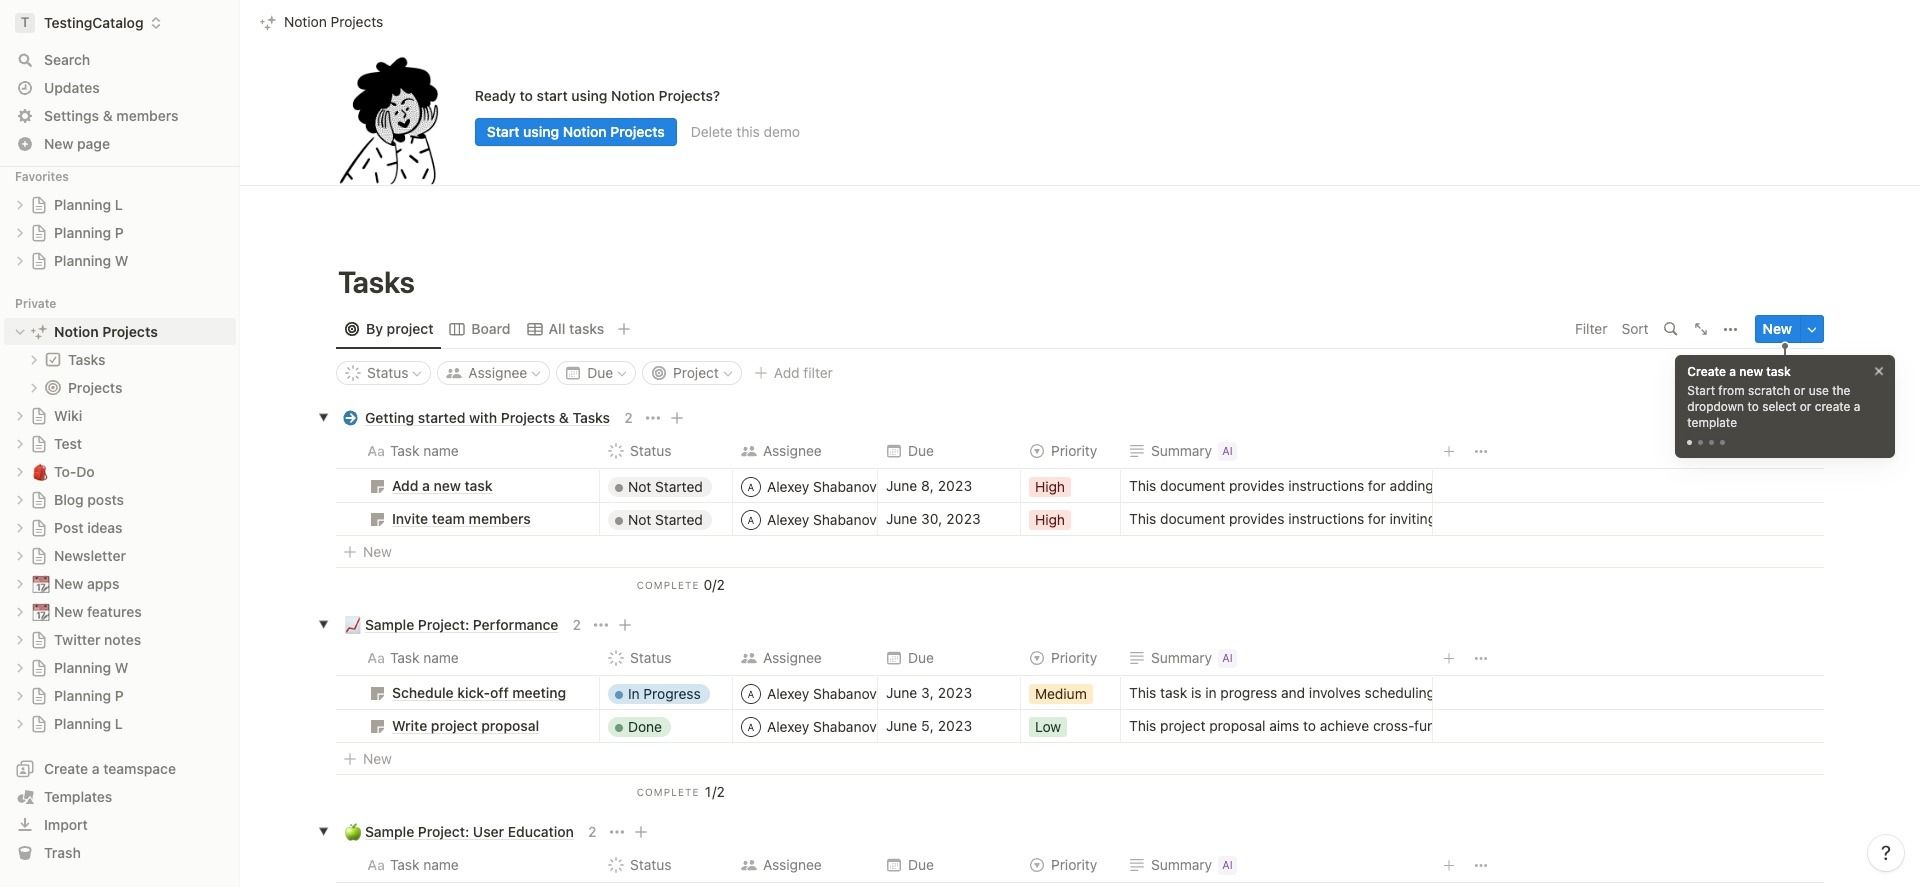 ICYMI: Notion rolled out powerful built-in project management features and integrations